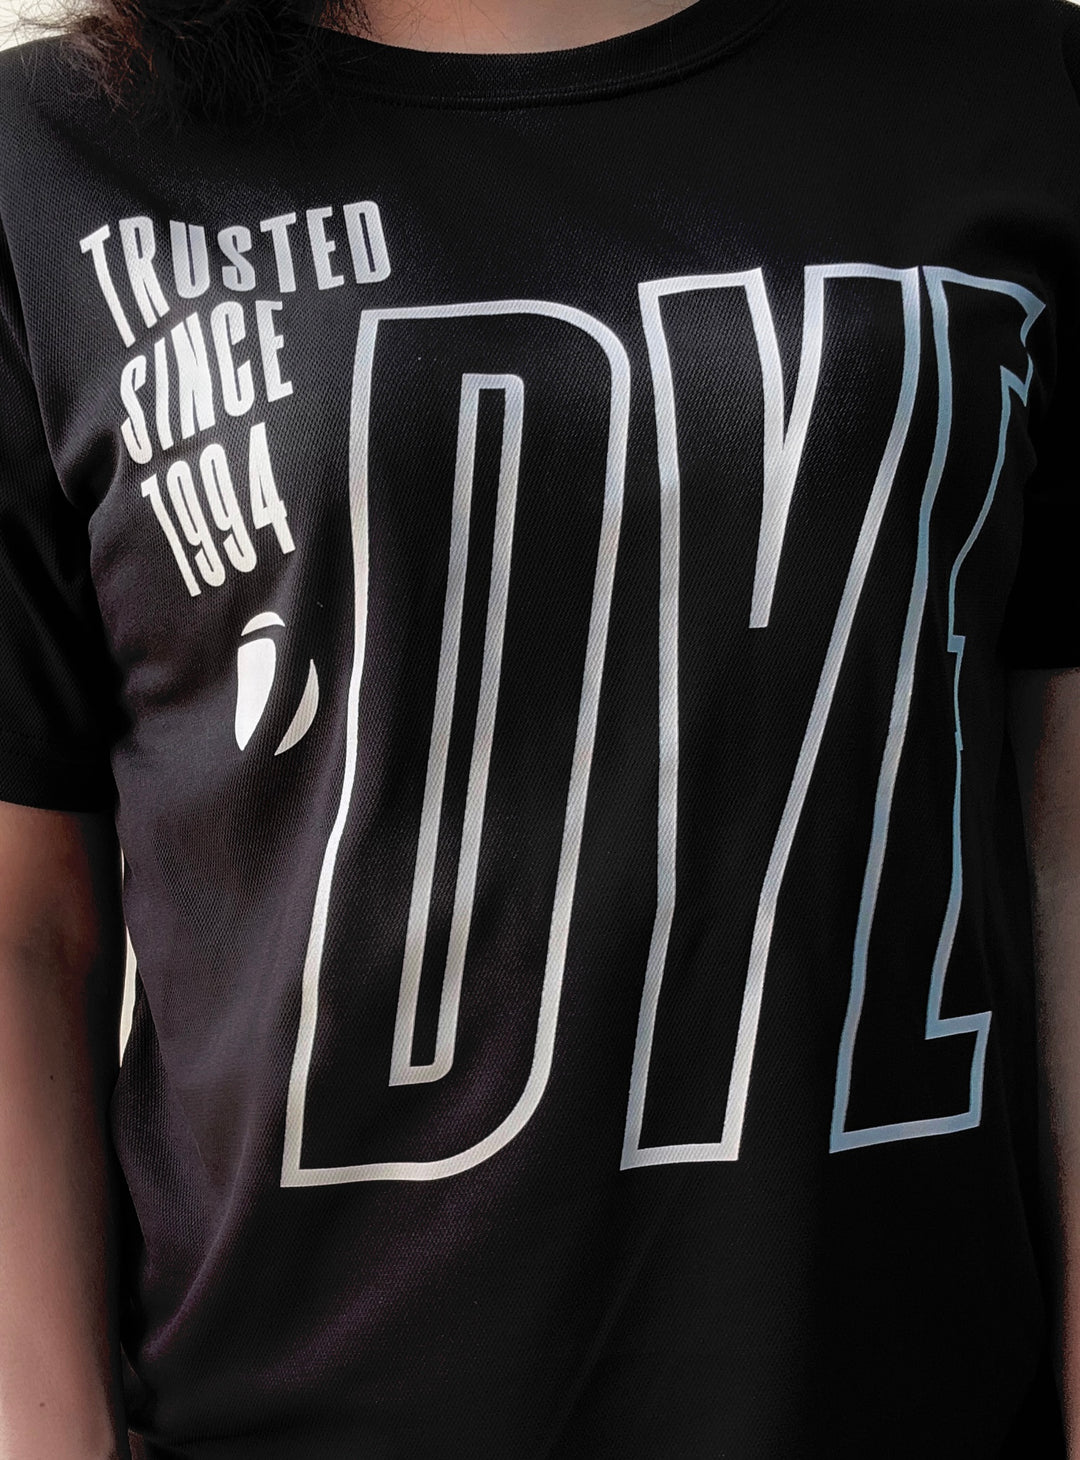 Quick Dry T-shirt - Trusted Black - New! Shipping Now!